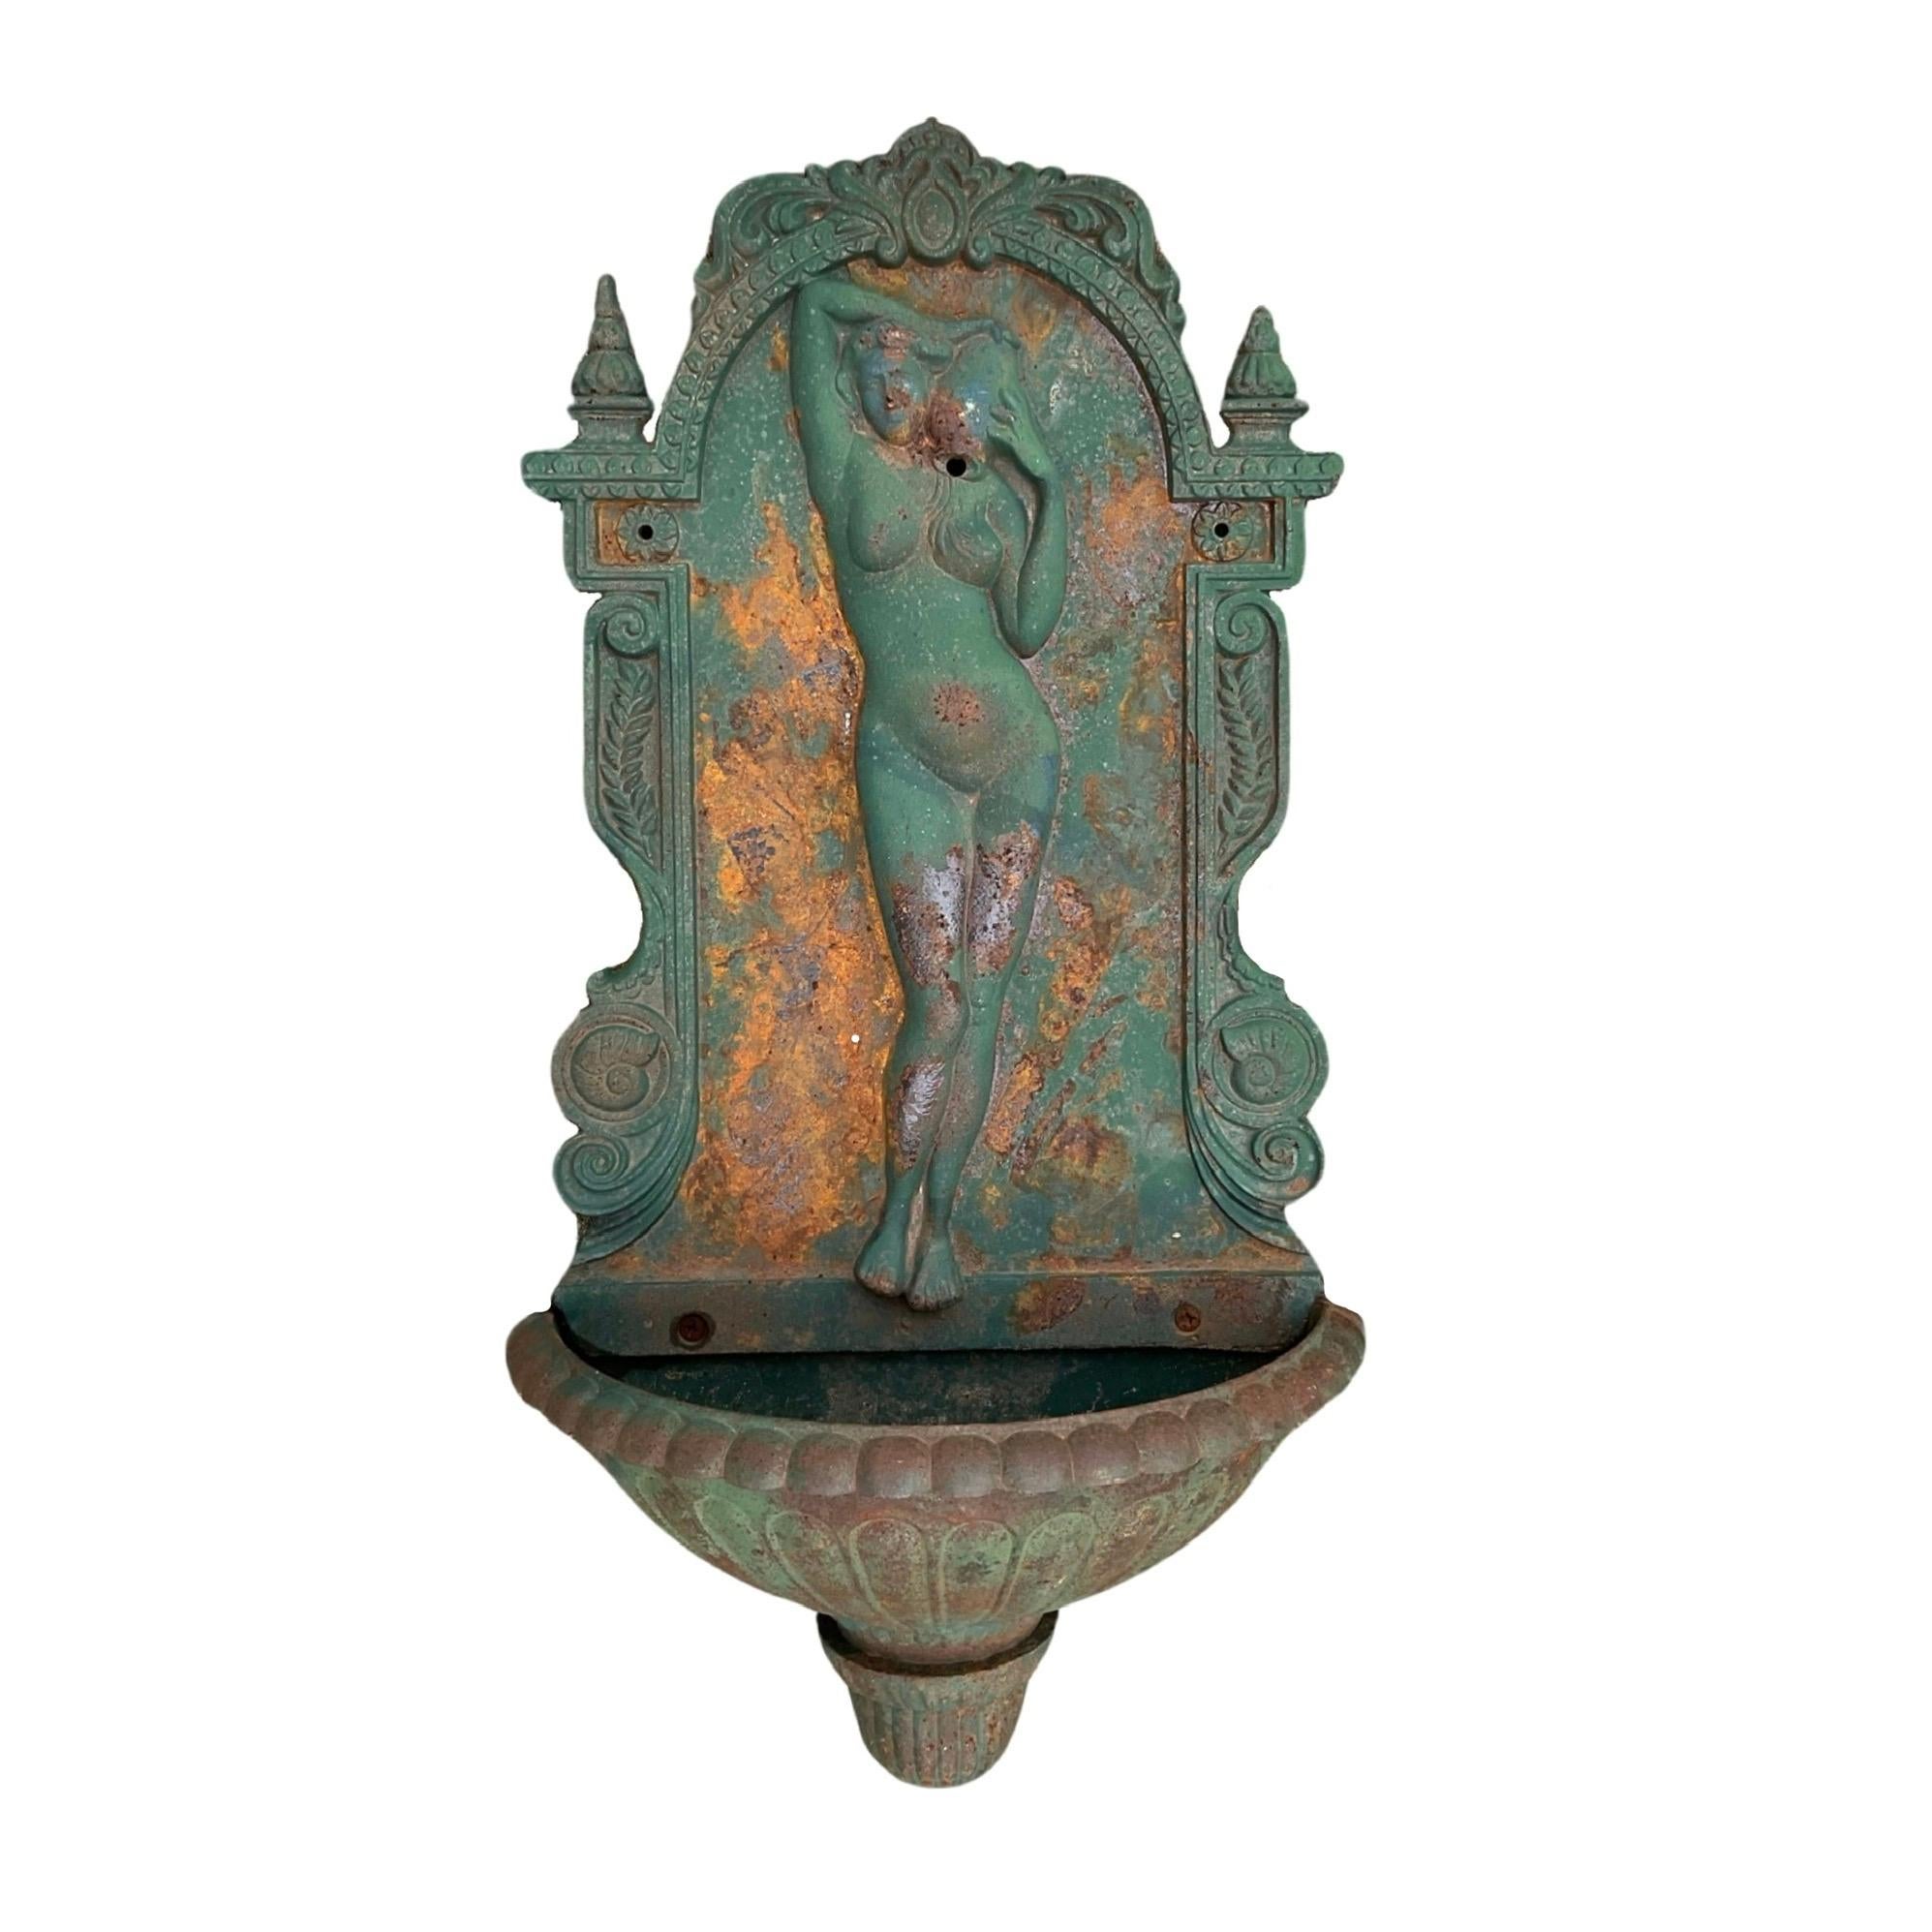 Enhance your outdoor space with a touch of French elegance. Our antique iron wall fountain from the 19th century features a beautiful carved venus sculpture, adding a rustic charm to your surroundings. The small size basin ensures a constant water